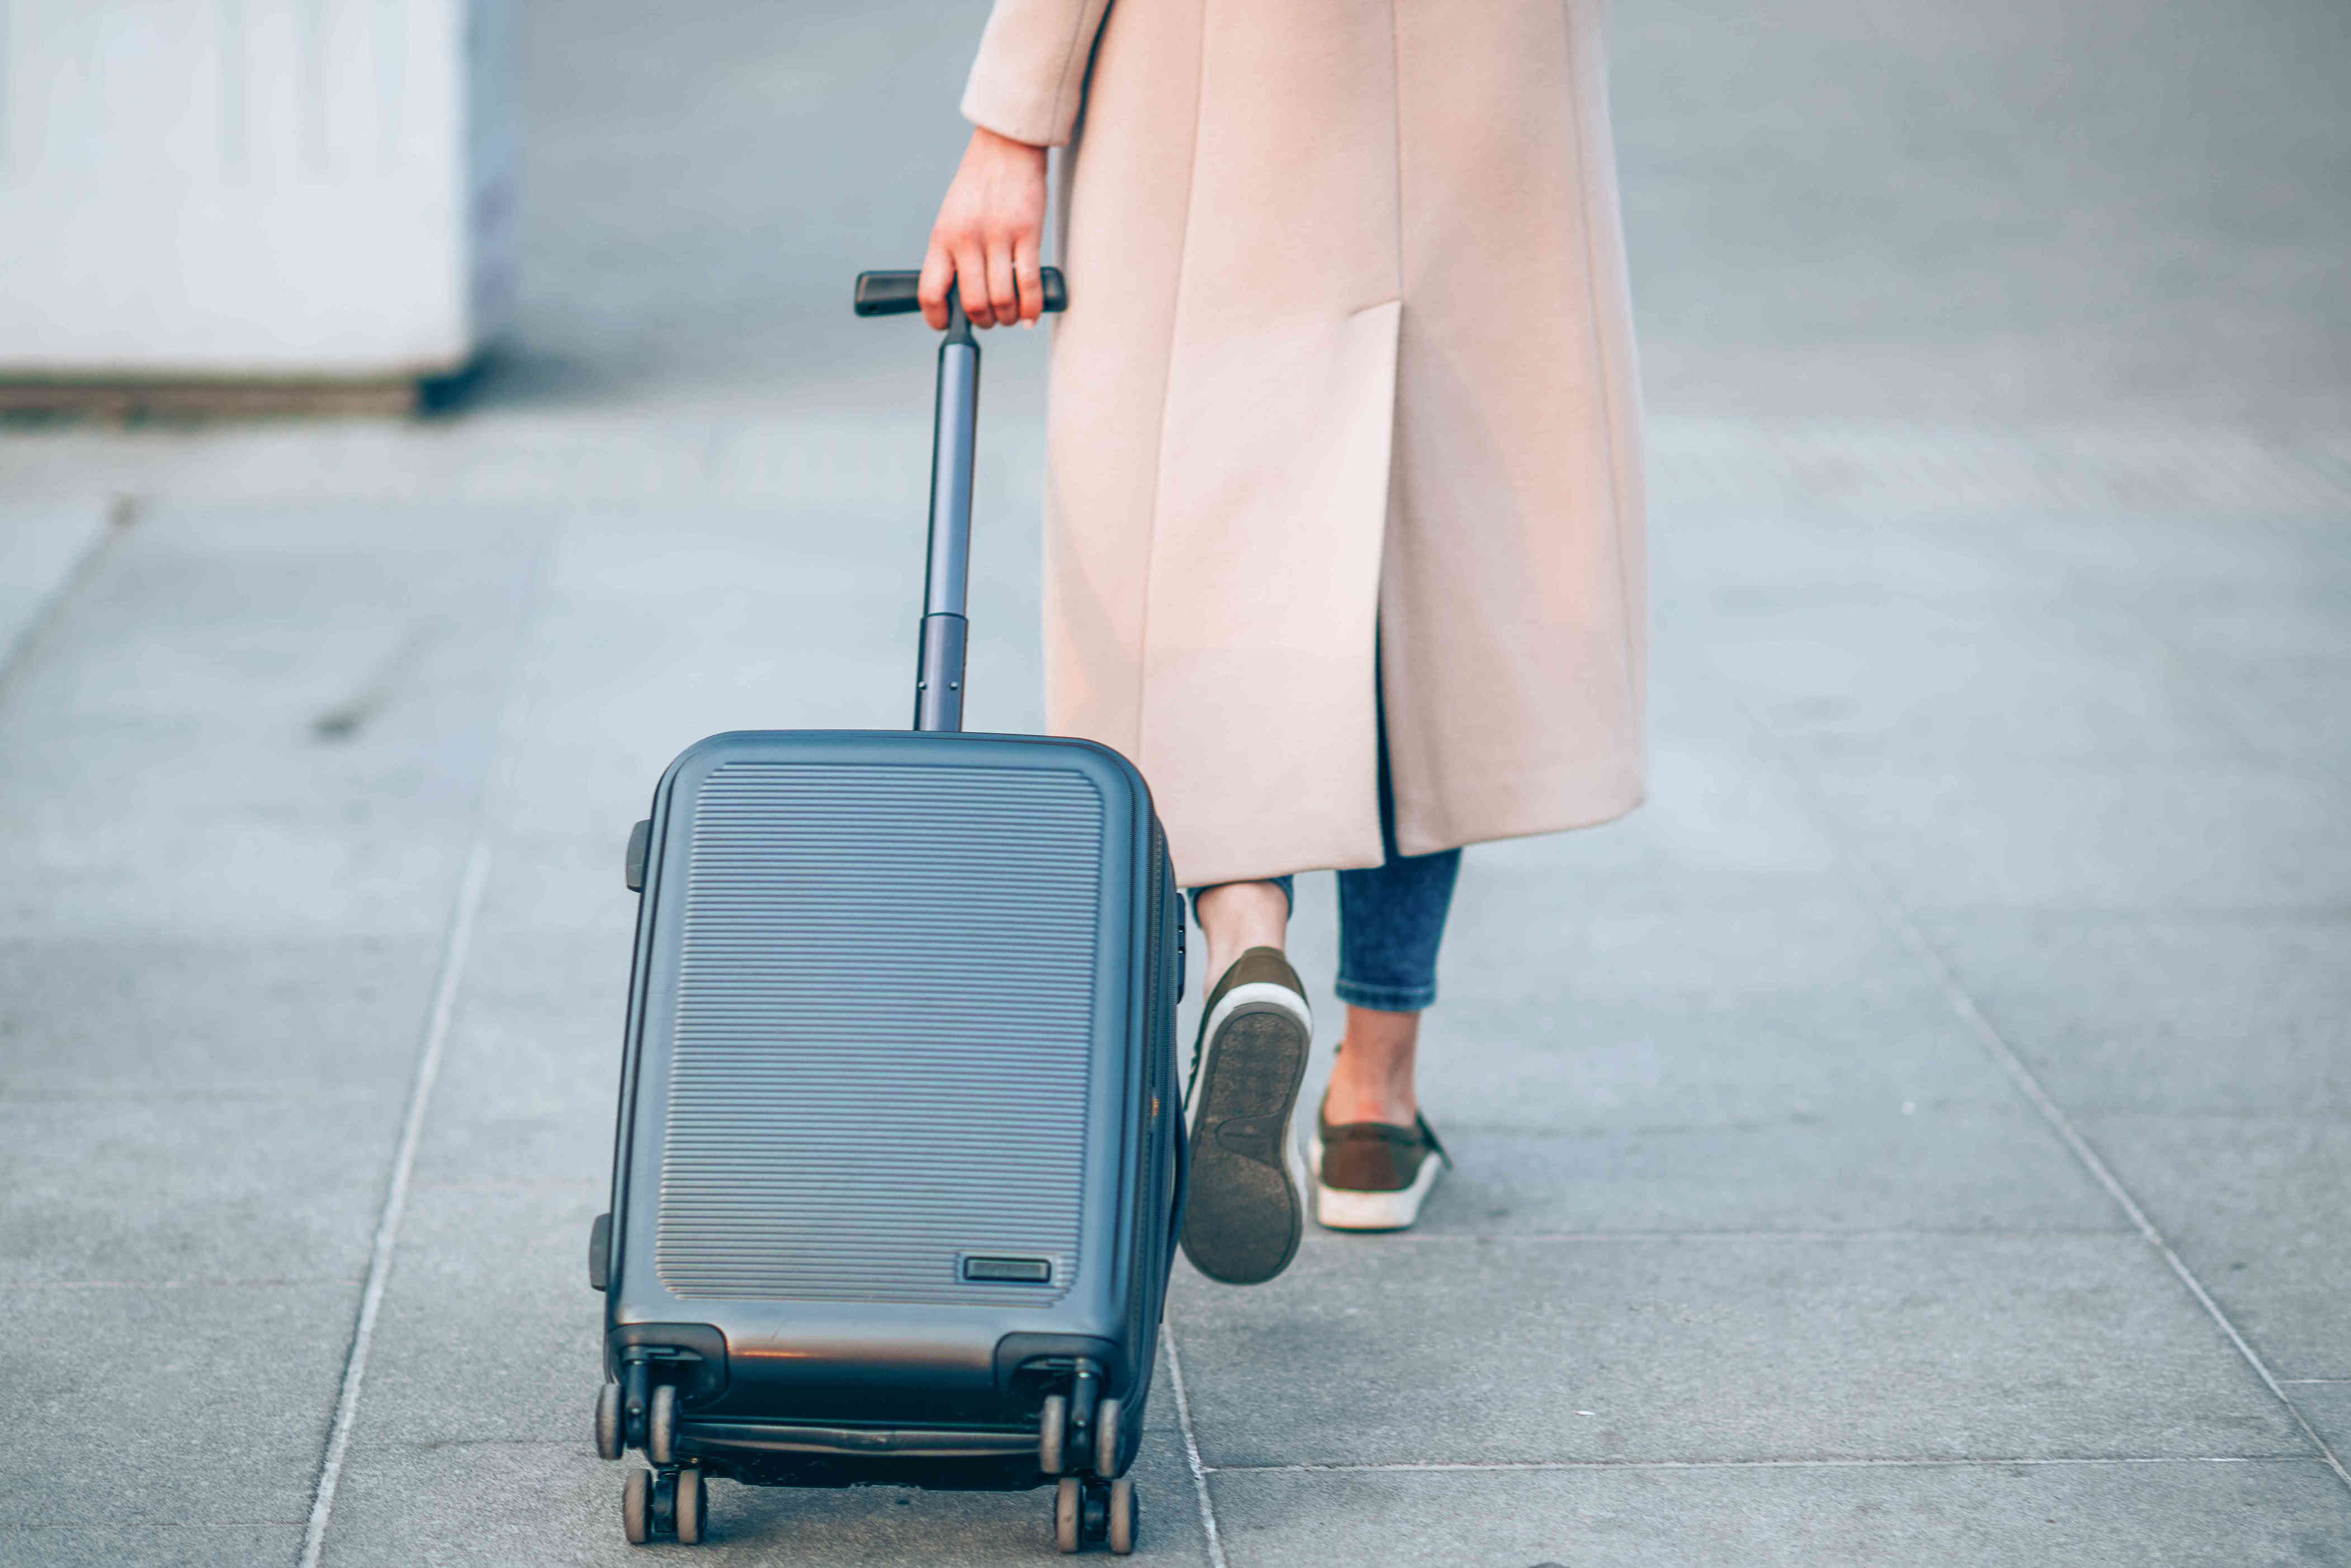 How To Clean Your Suitcase After A Trip, According To The Pros